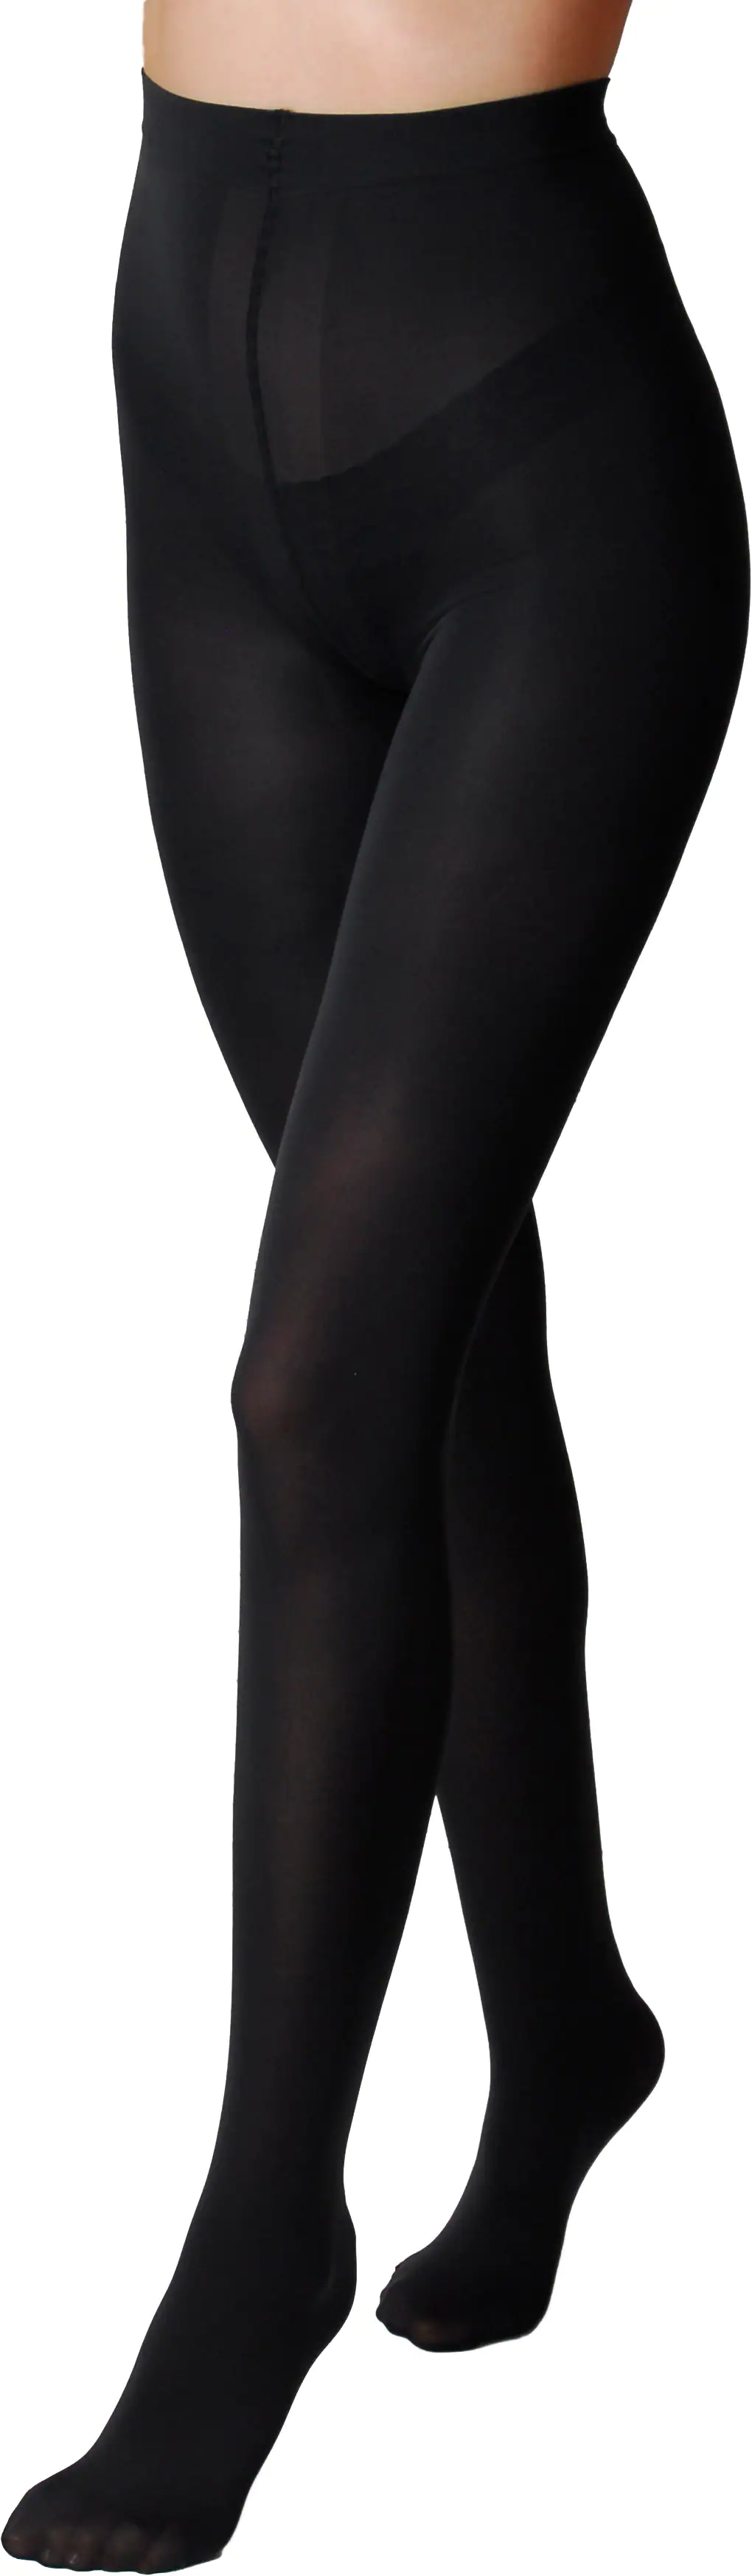 Omero Opaque 3D Tights